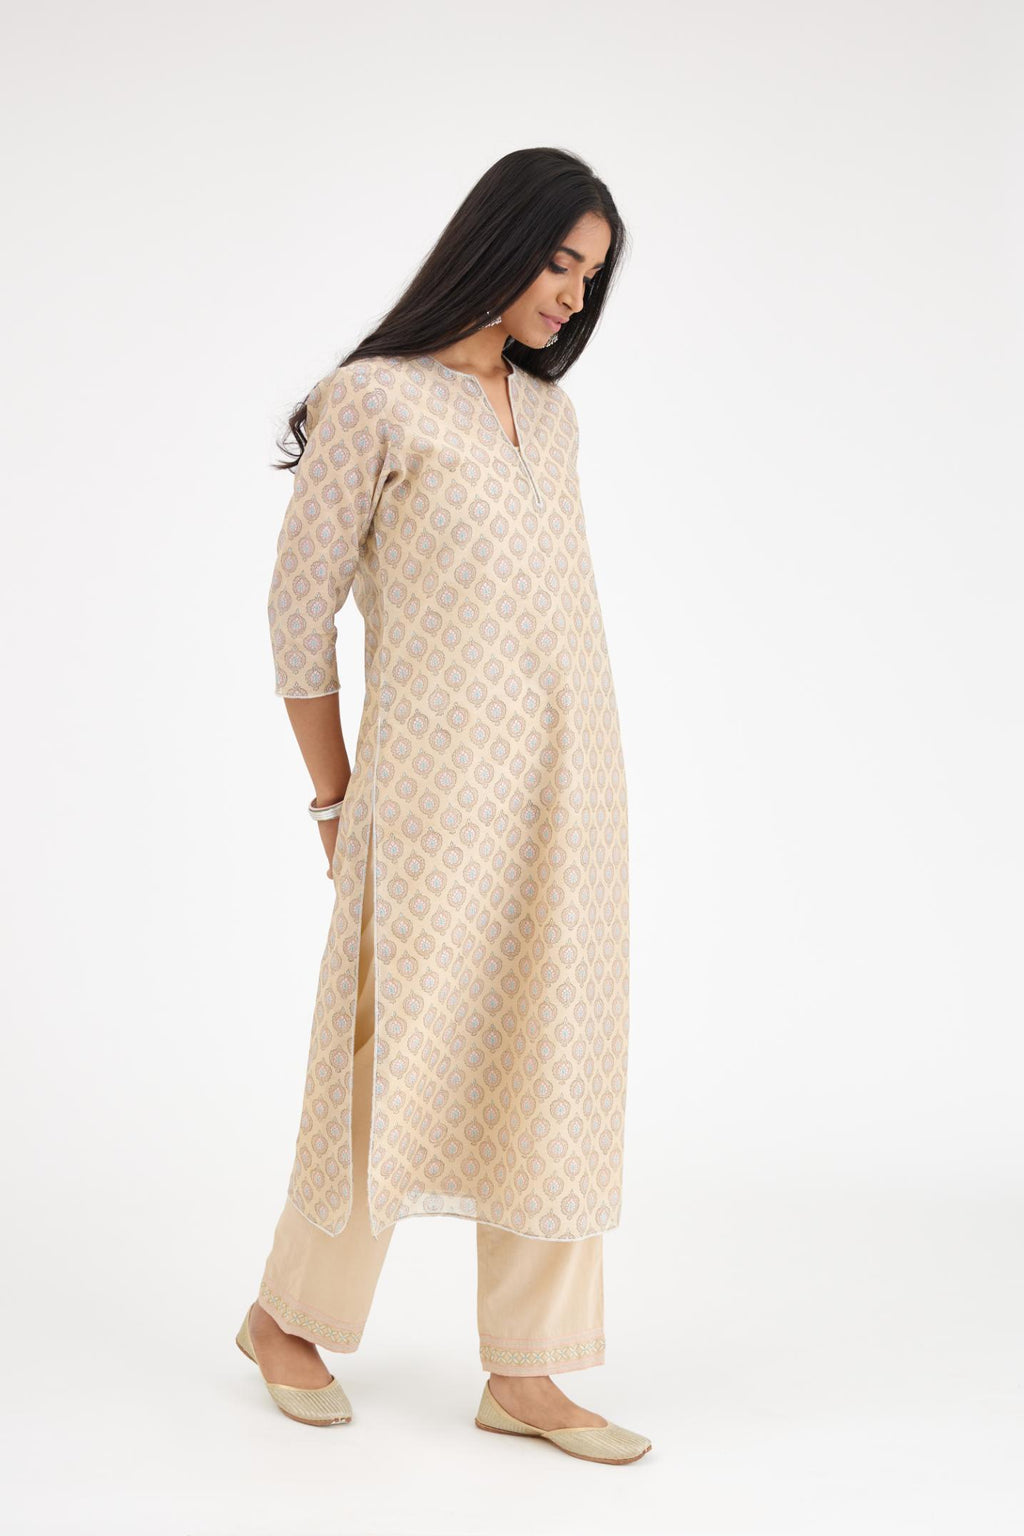 Beige silk chanderi straight kurta set with all-over hand block print and silver bugle beads detailing.